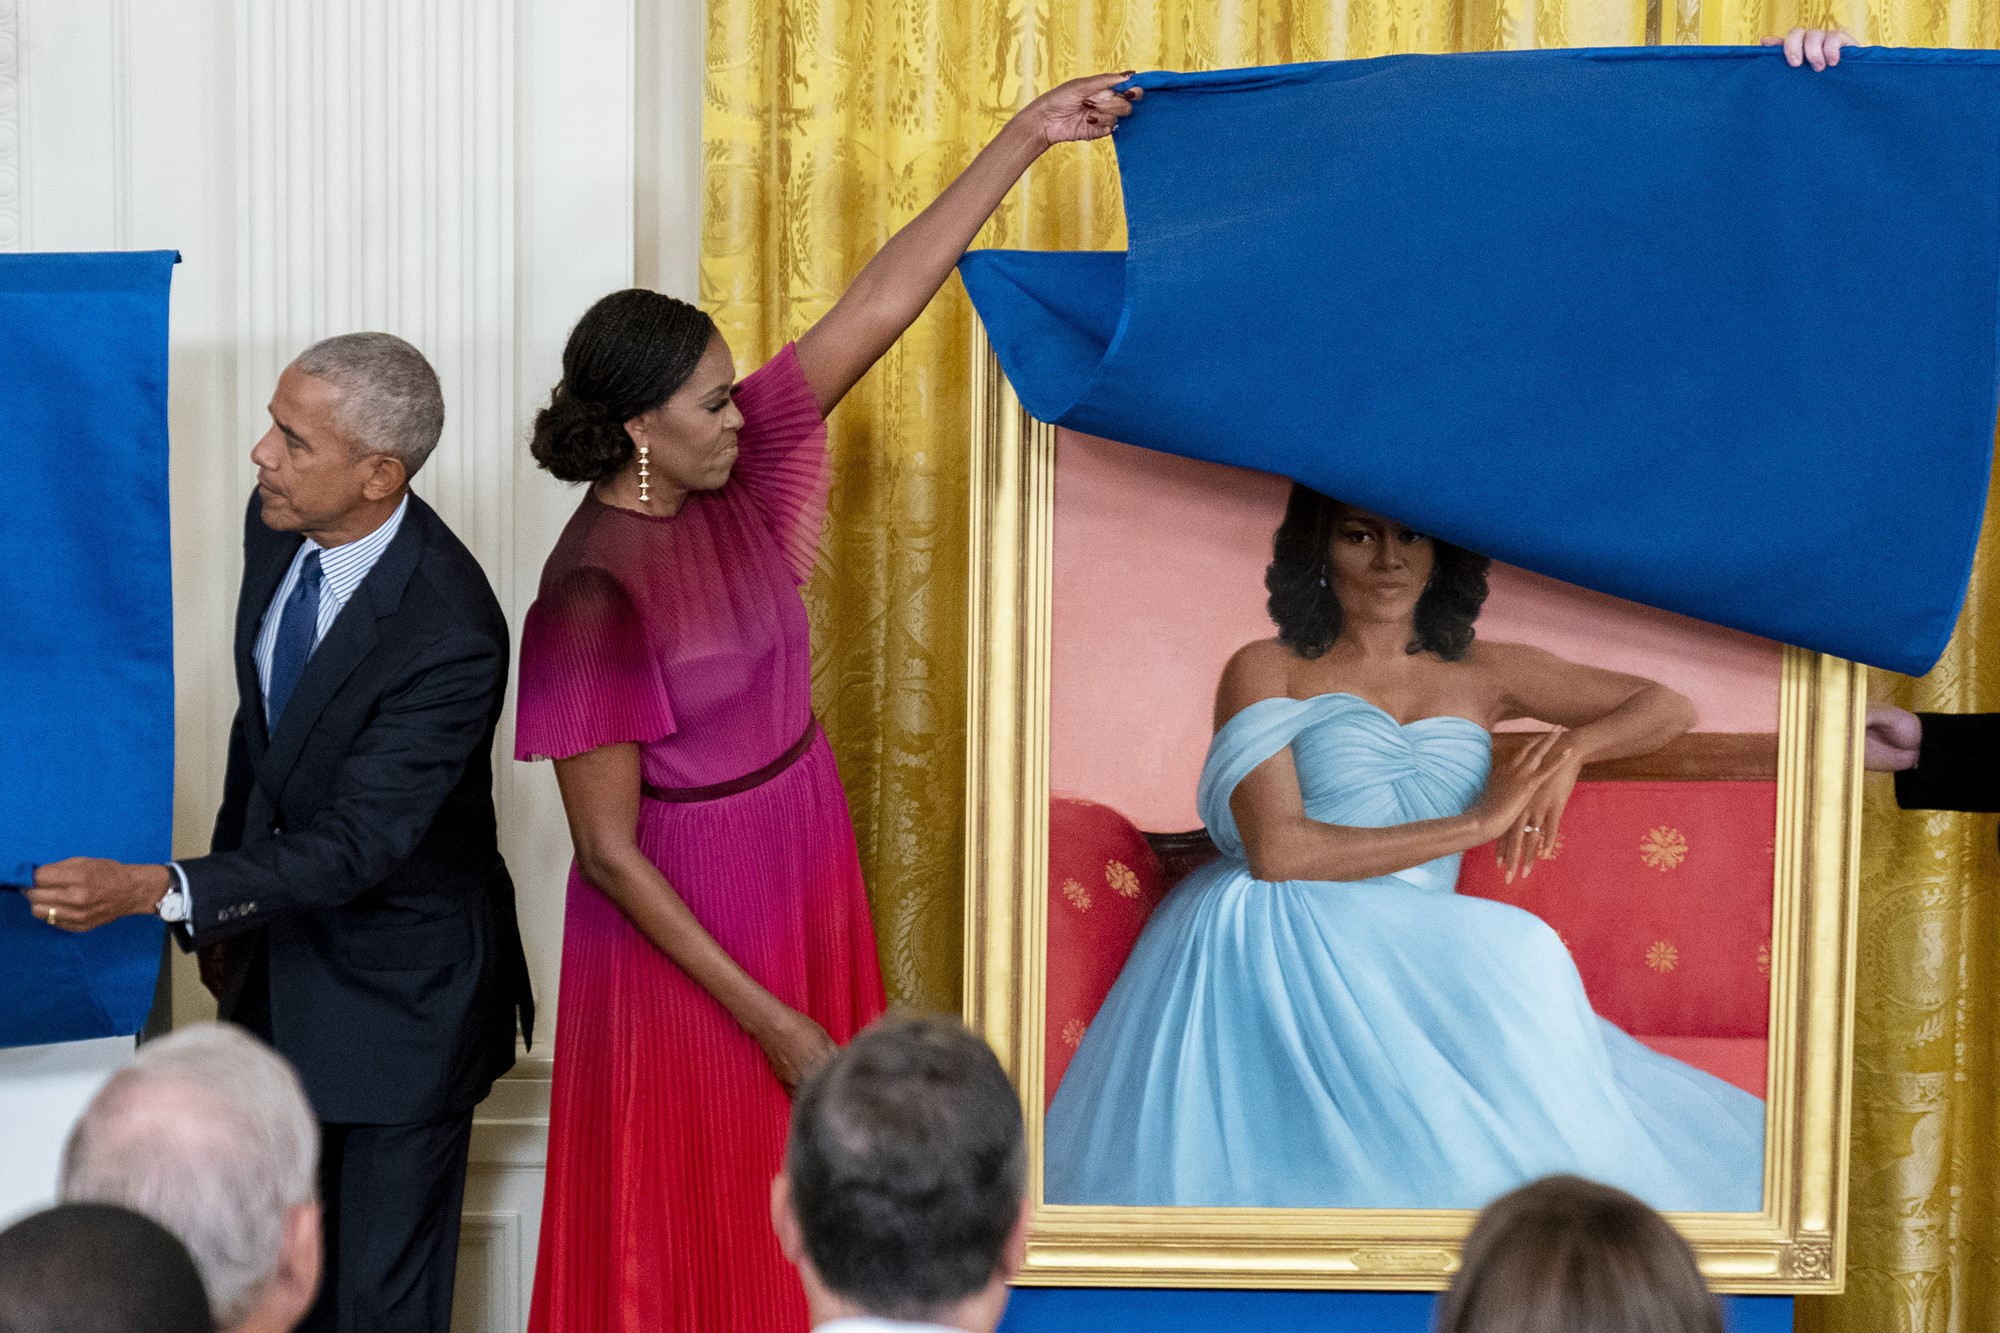 Former President Barack Obama and former first lady Michelle Obama unveil their official White House portraits during a ceremony in the East Room of the White House